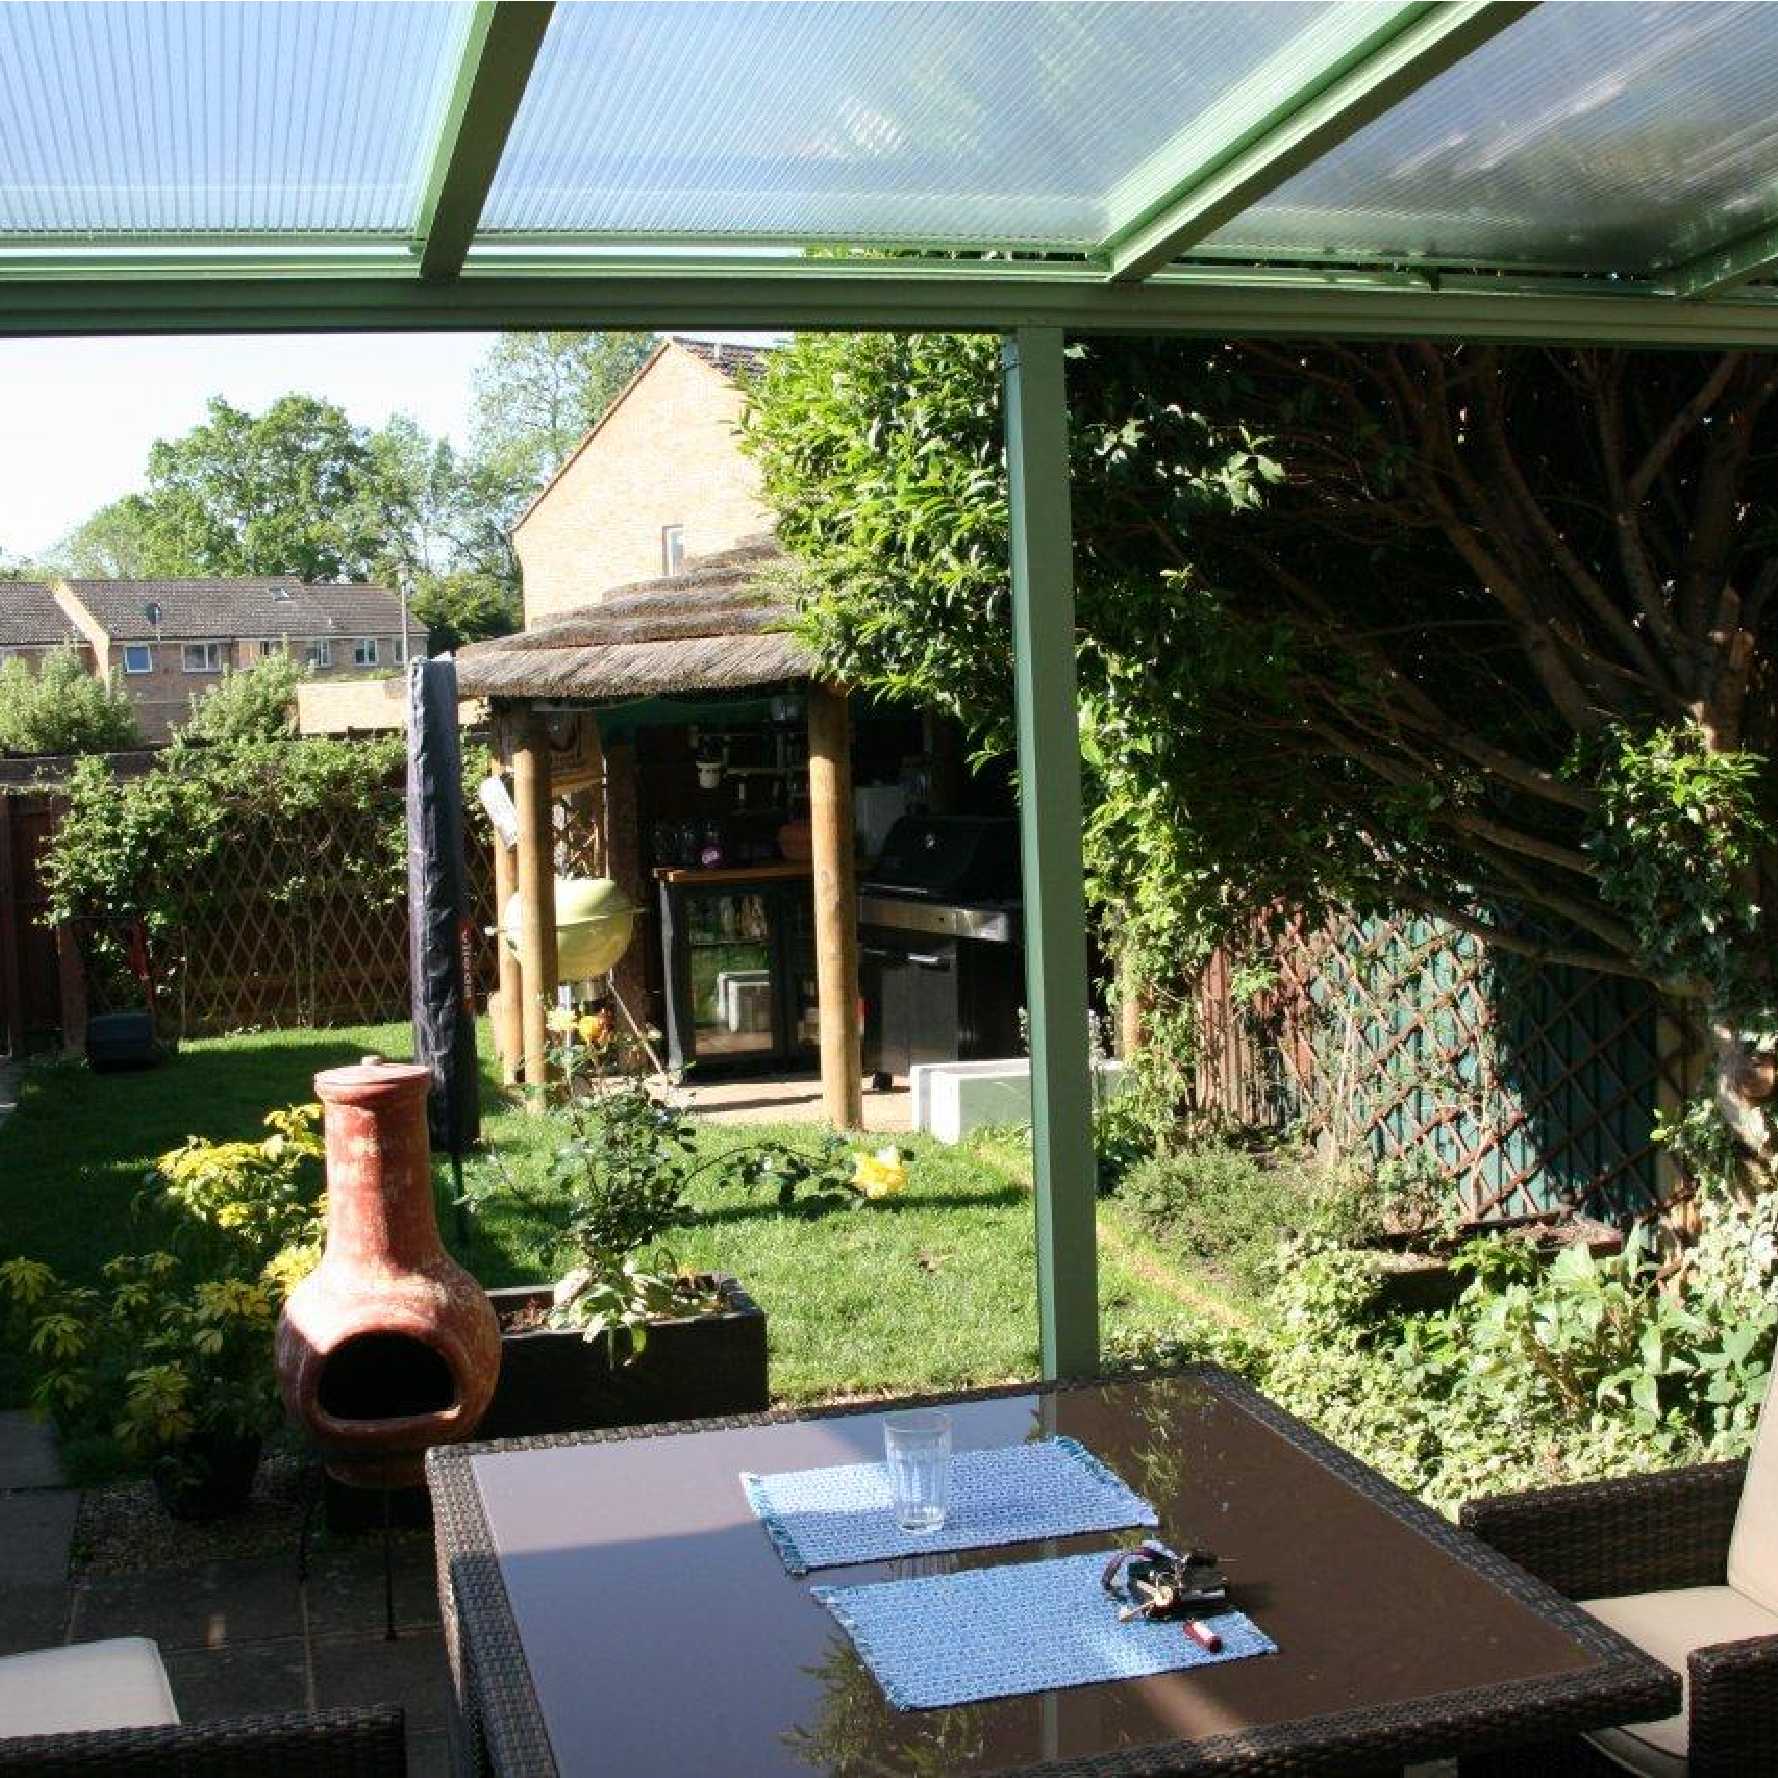 Affordable Omega Smart Lean-To Canopy, White with 16mm Polycarbonate Glazing - 7.8m (W) x 4.0m (P), (4) Supporting Posts